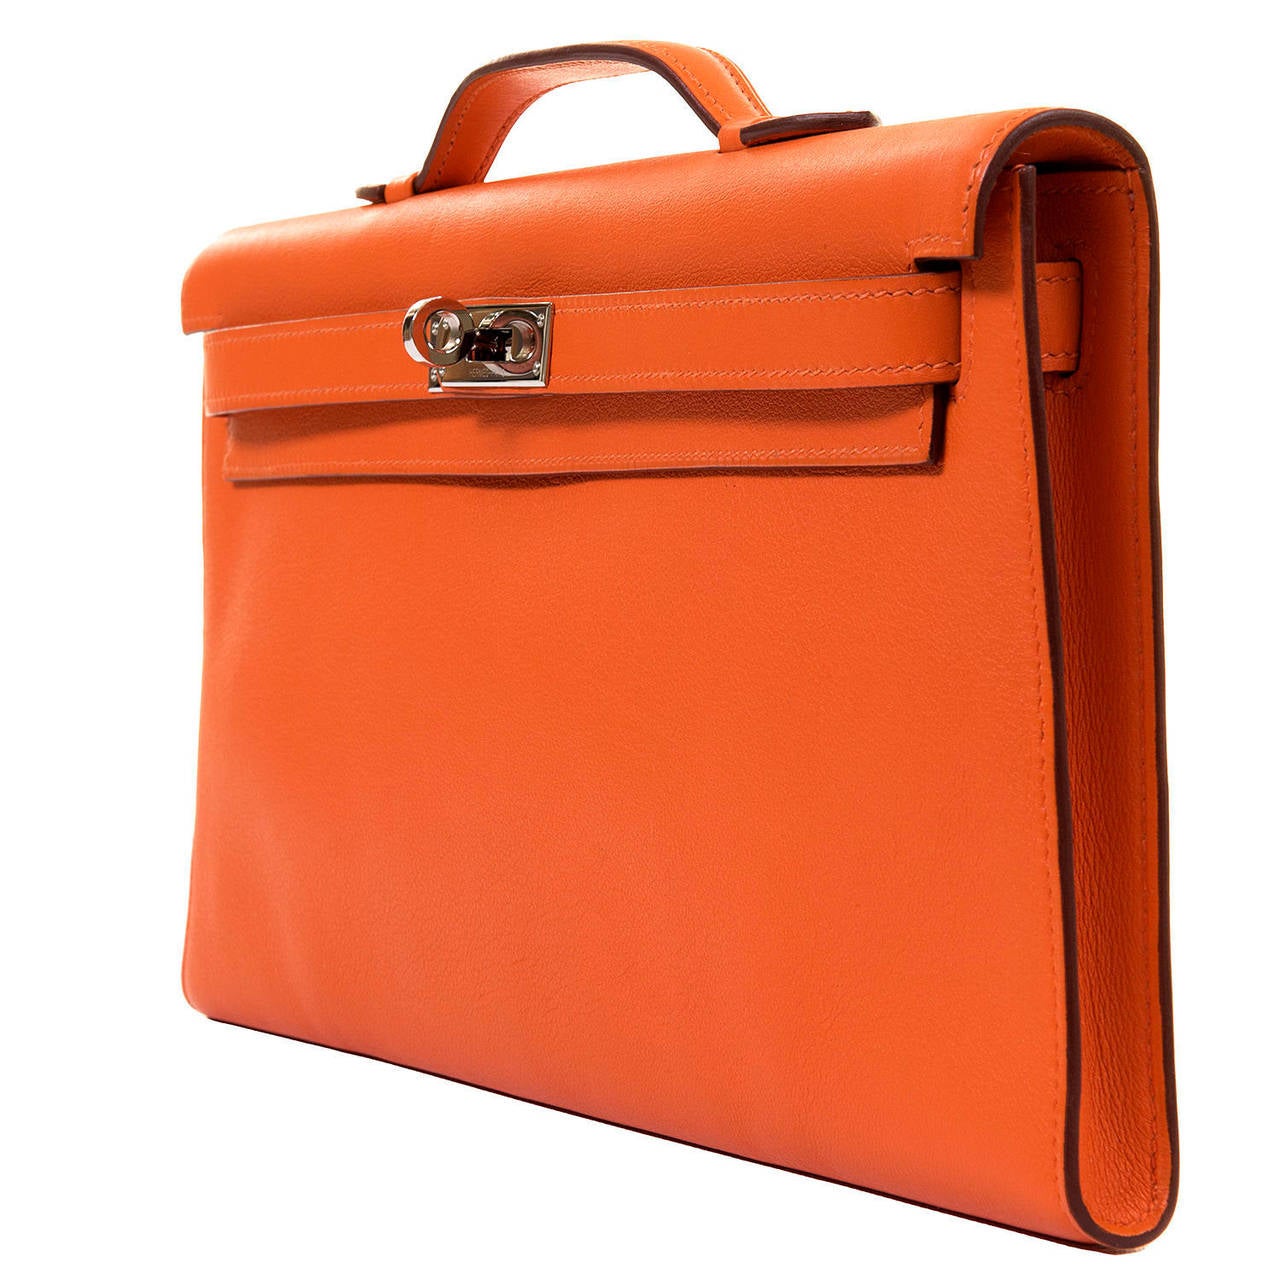 A sensational orange 'Cut Kelly' Clutch Bag in Veau Swift leather with Silver Palladium Hardware, in pristine 'Store-Fresh' condition. From the Hermes 2007 collection, the bag has a matching leather interior with an open side pocket, with the inside